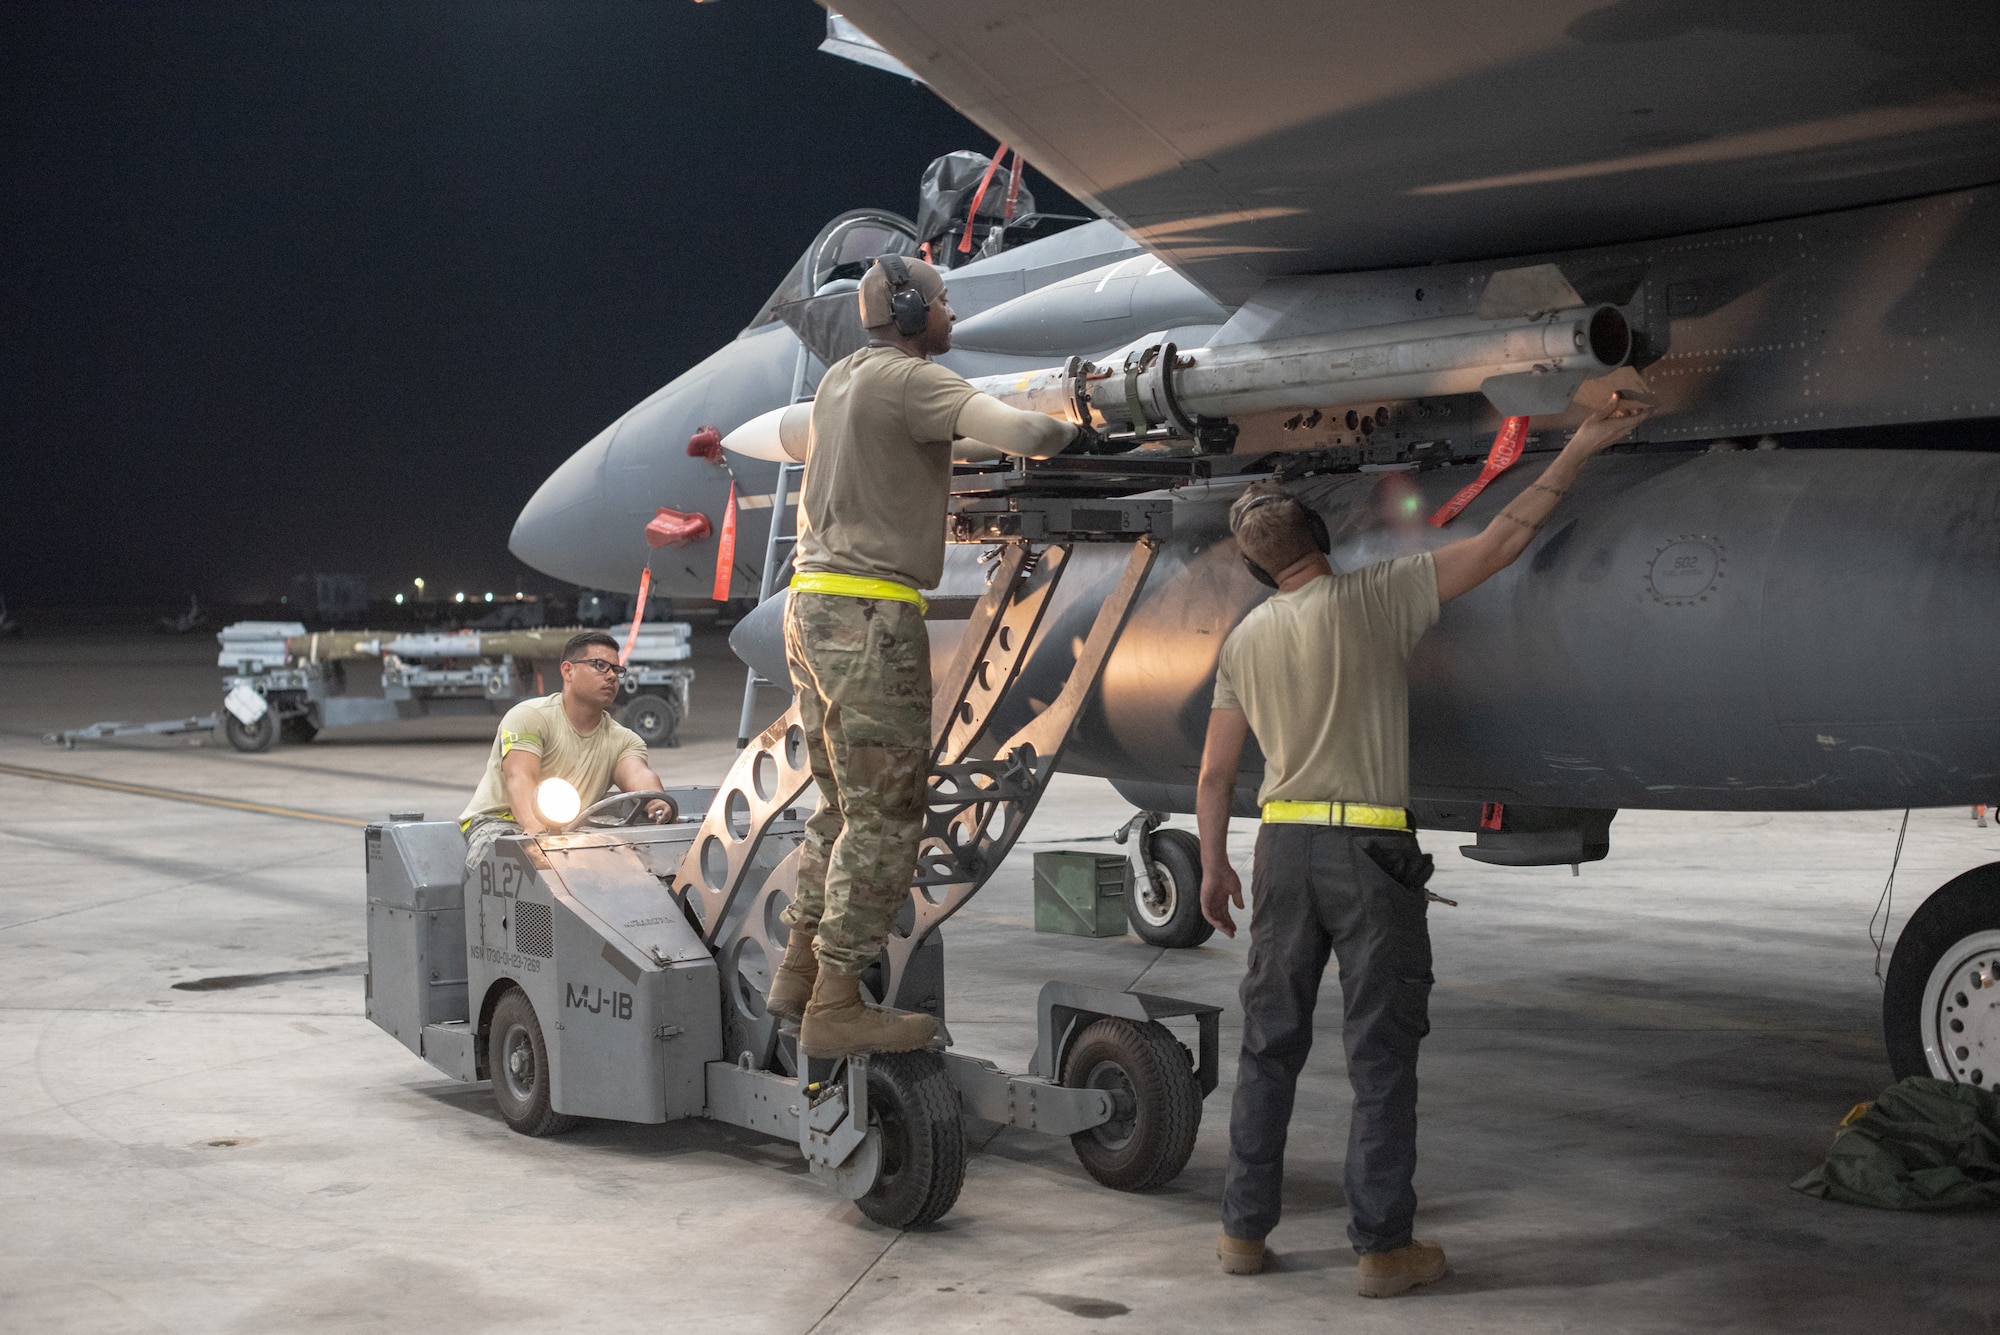 An F-15E Strike Eagle weapons load crew team attaches an AIM-120D to a pylon July 15, 2019, at Al Dhafra Air Base, United Arab Emirates. The AIM-120D is the latest Advanced Medium-Range Air-to-Air missile (AMRAAM) and features improved navigation, kinematics, lethality and hardware and software updates to enhance its electronic protection capabilities against more capable threats. (U.S. Air Force photo by Staff Sgt. Chris Thornbury)